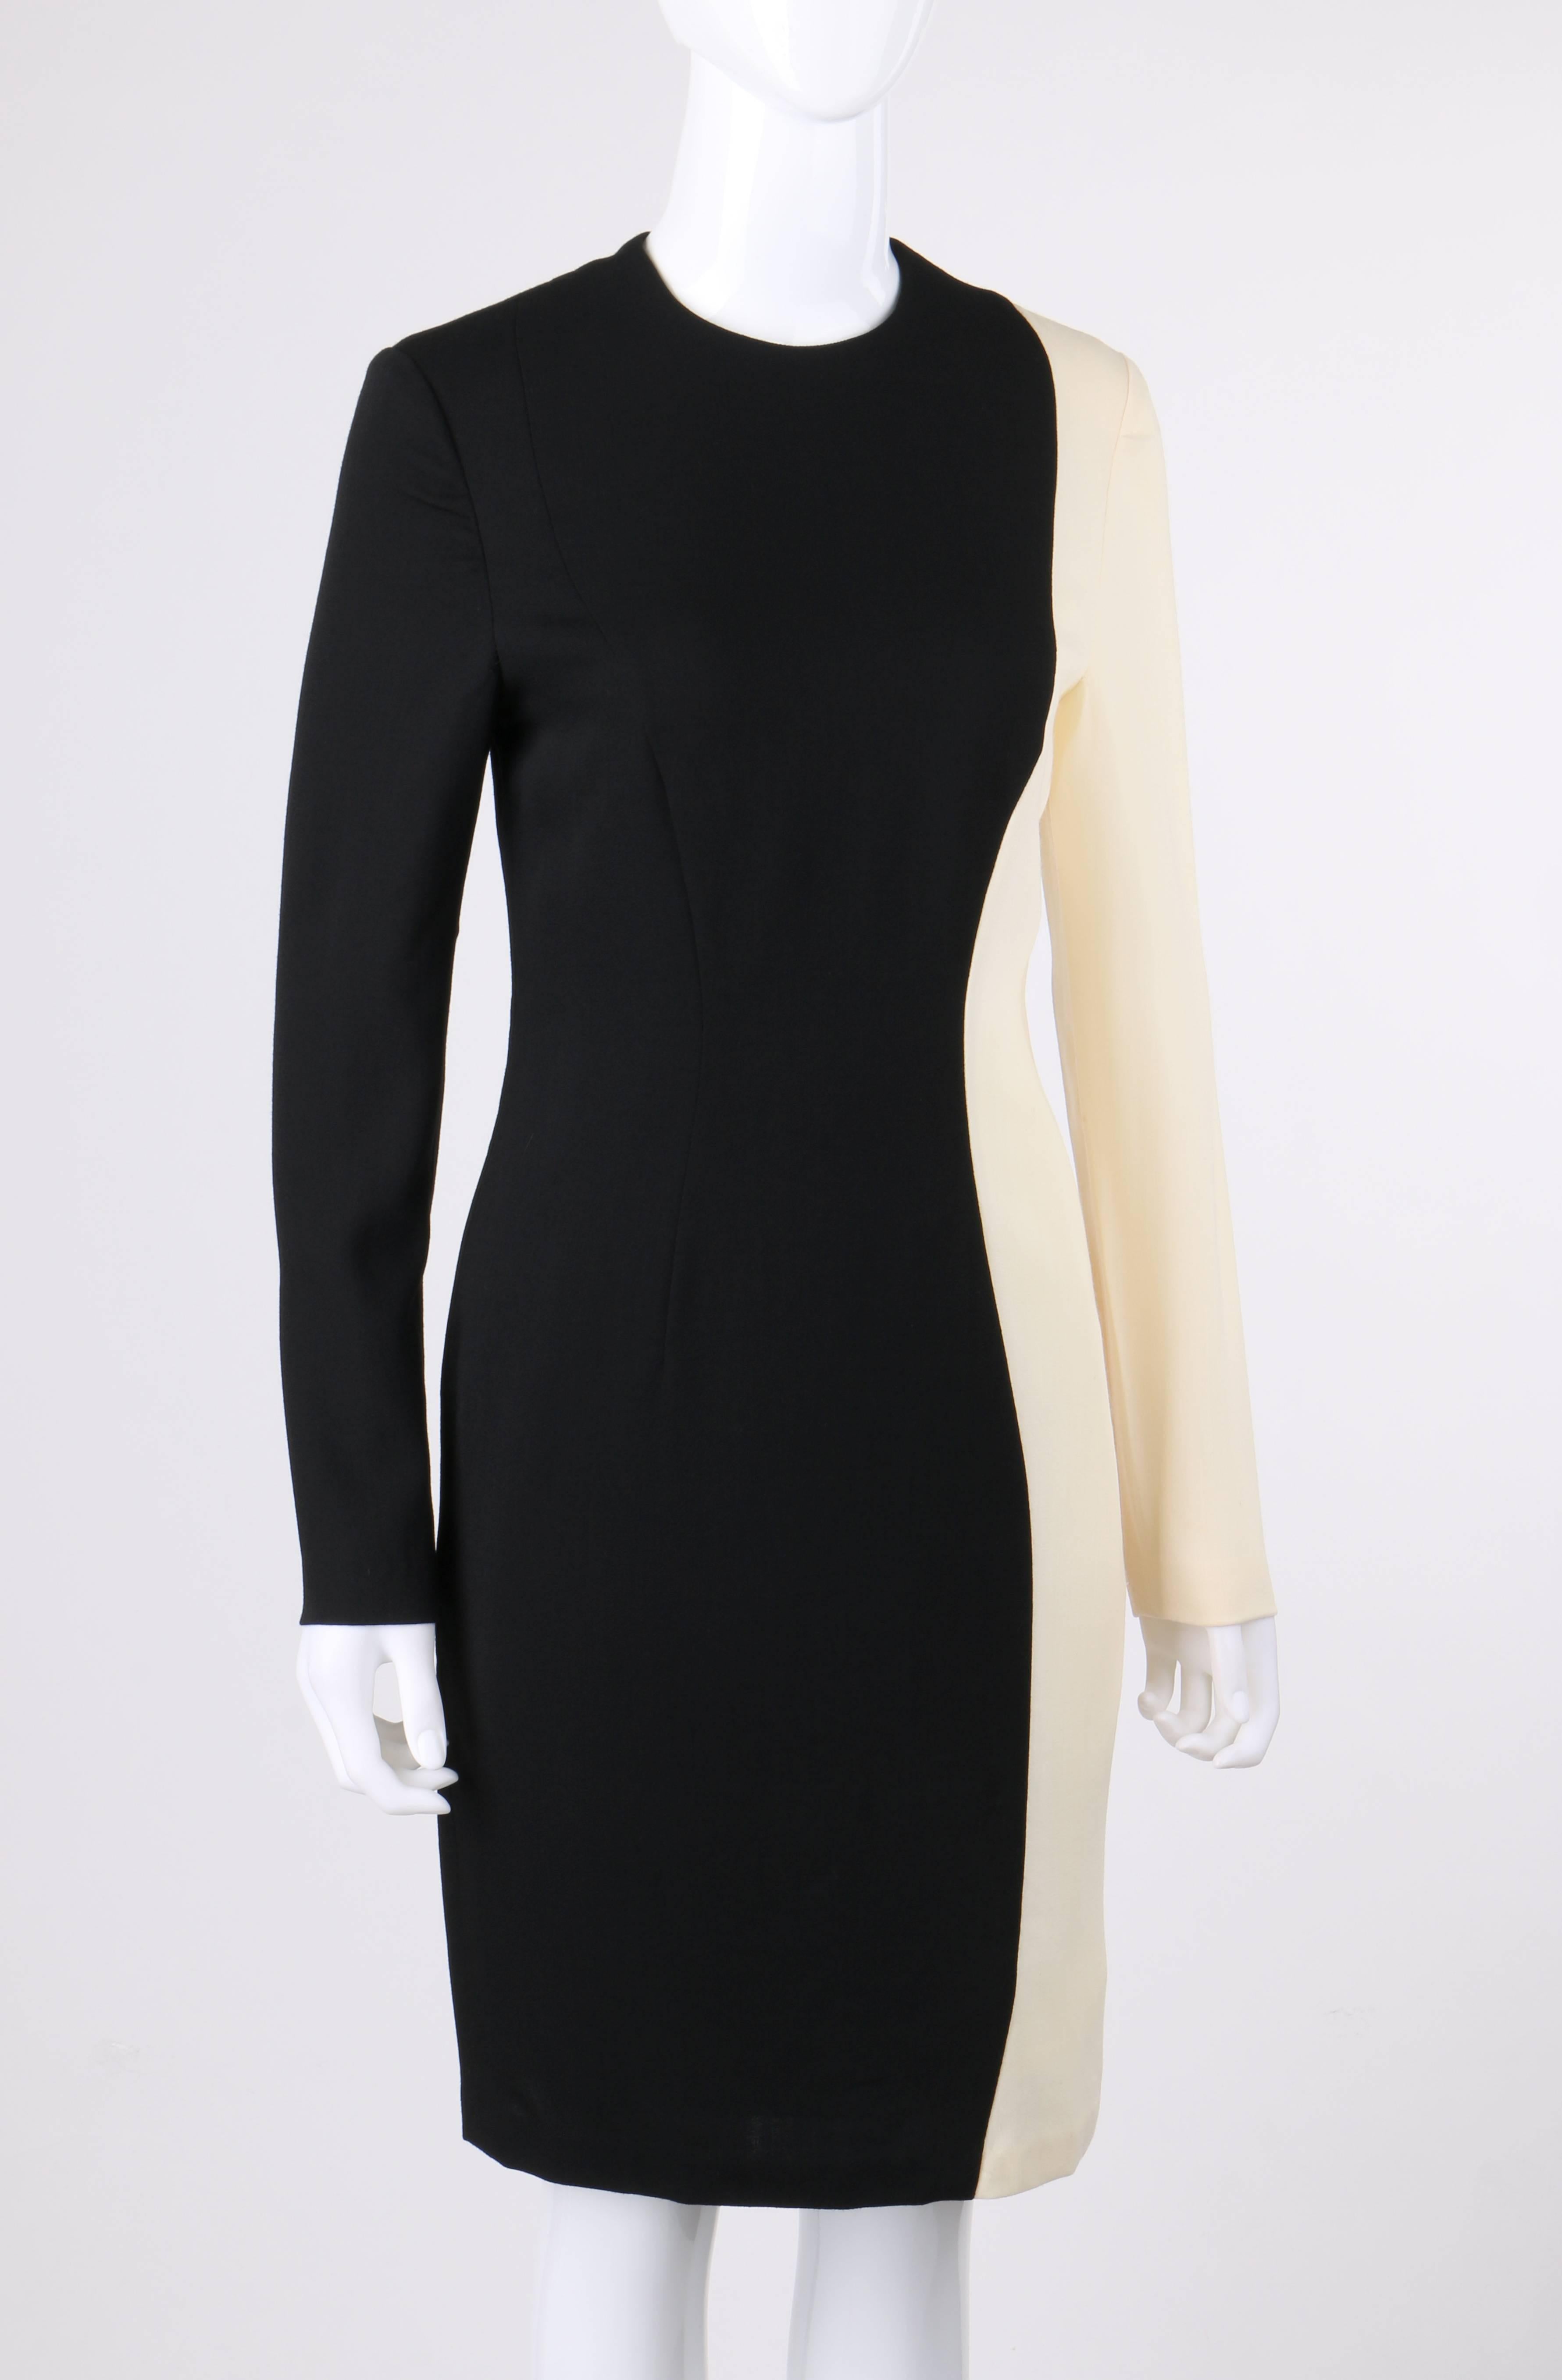 Vintage Pierre Cardin c.1980's black and ivory color-block wool cocktail dress. Long sleeve shift style. Crew neckline. Stylized curved princess seams. Center back zipper closure. Center back slit. Partially lined. Marked Fabric Content: 